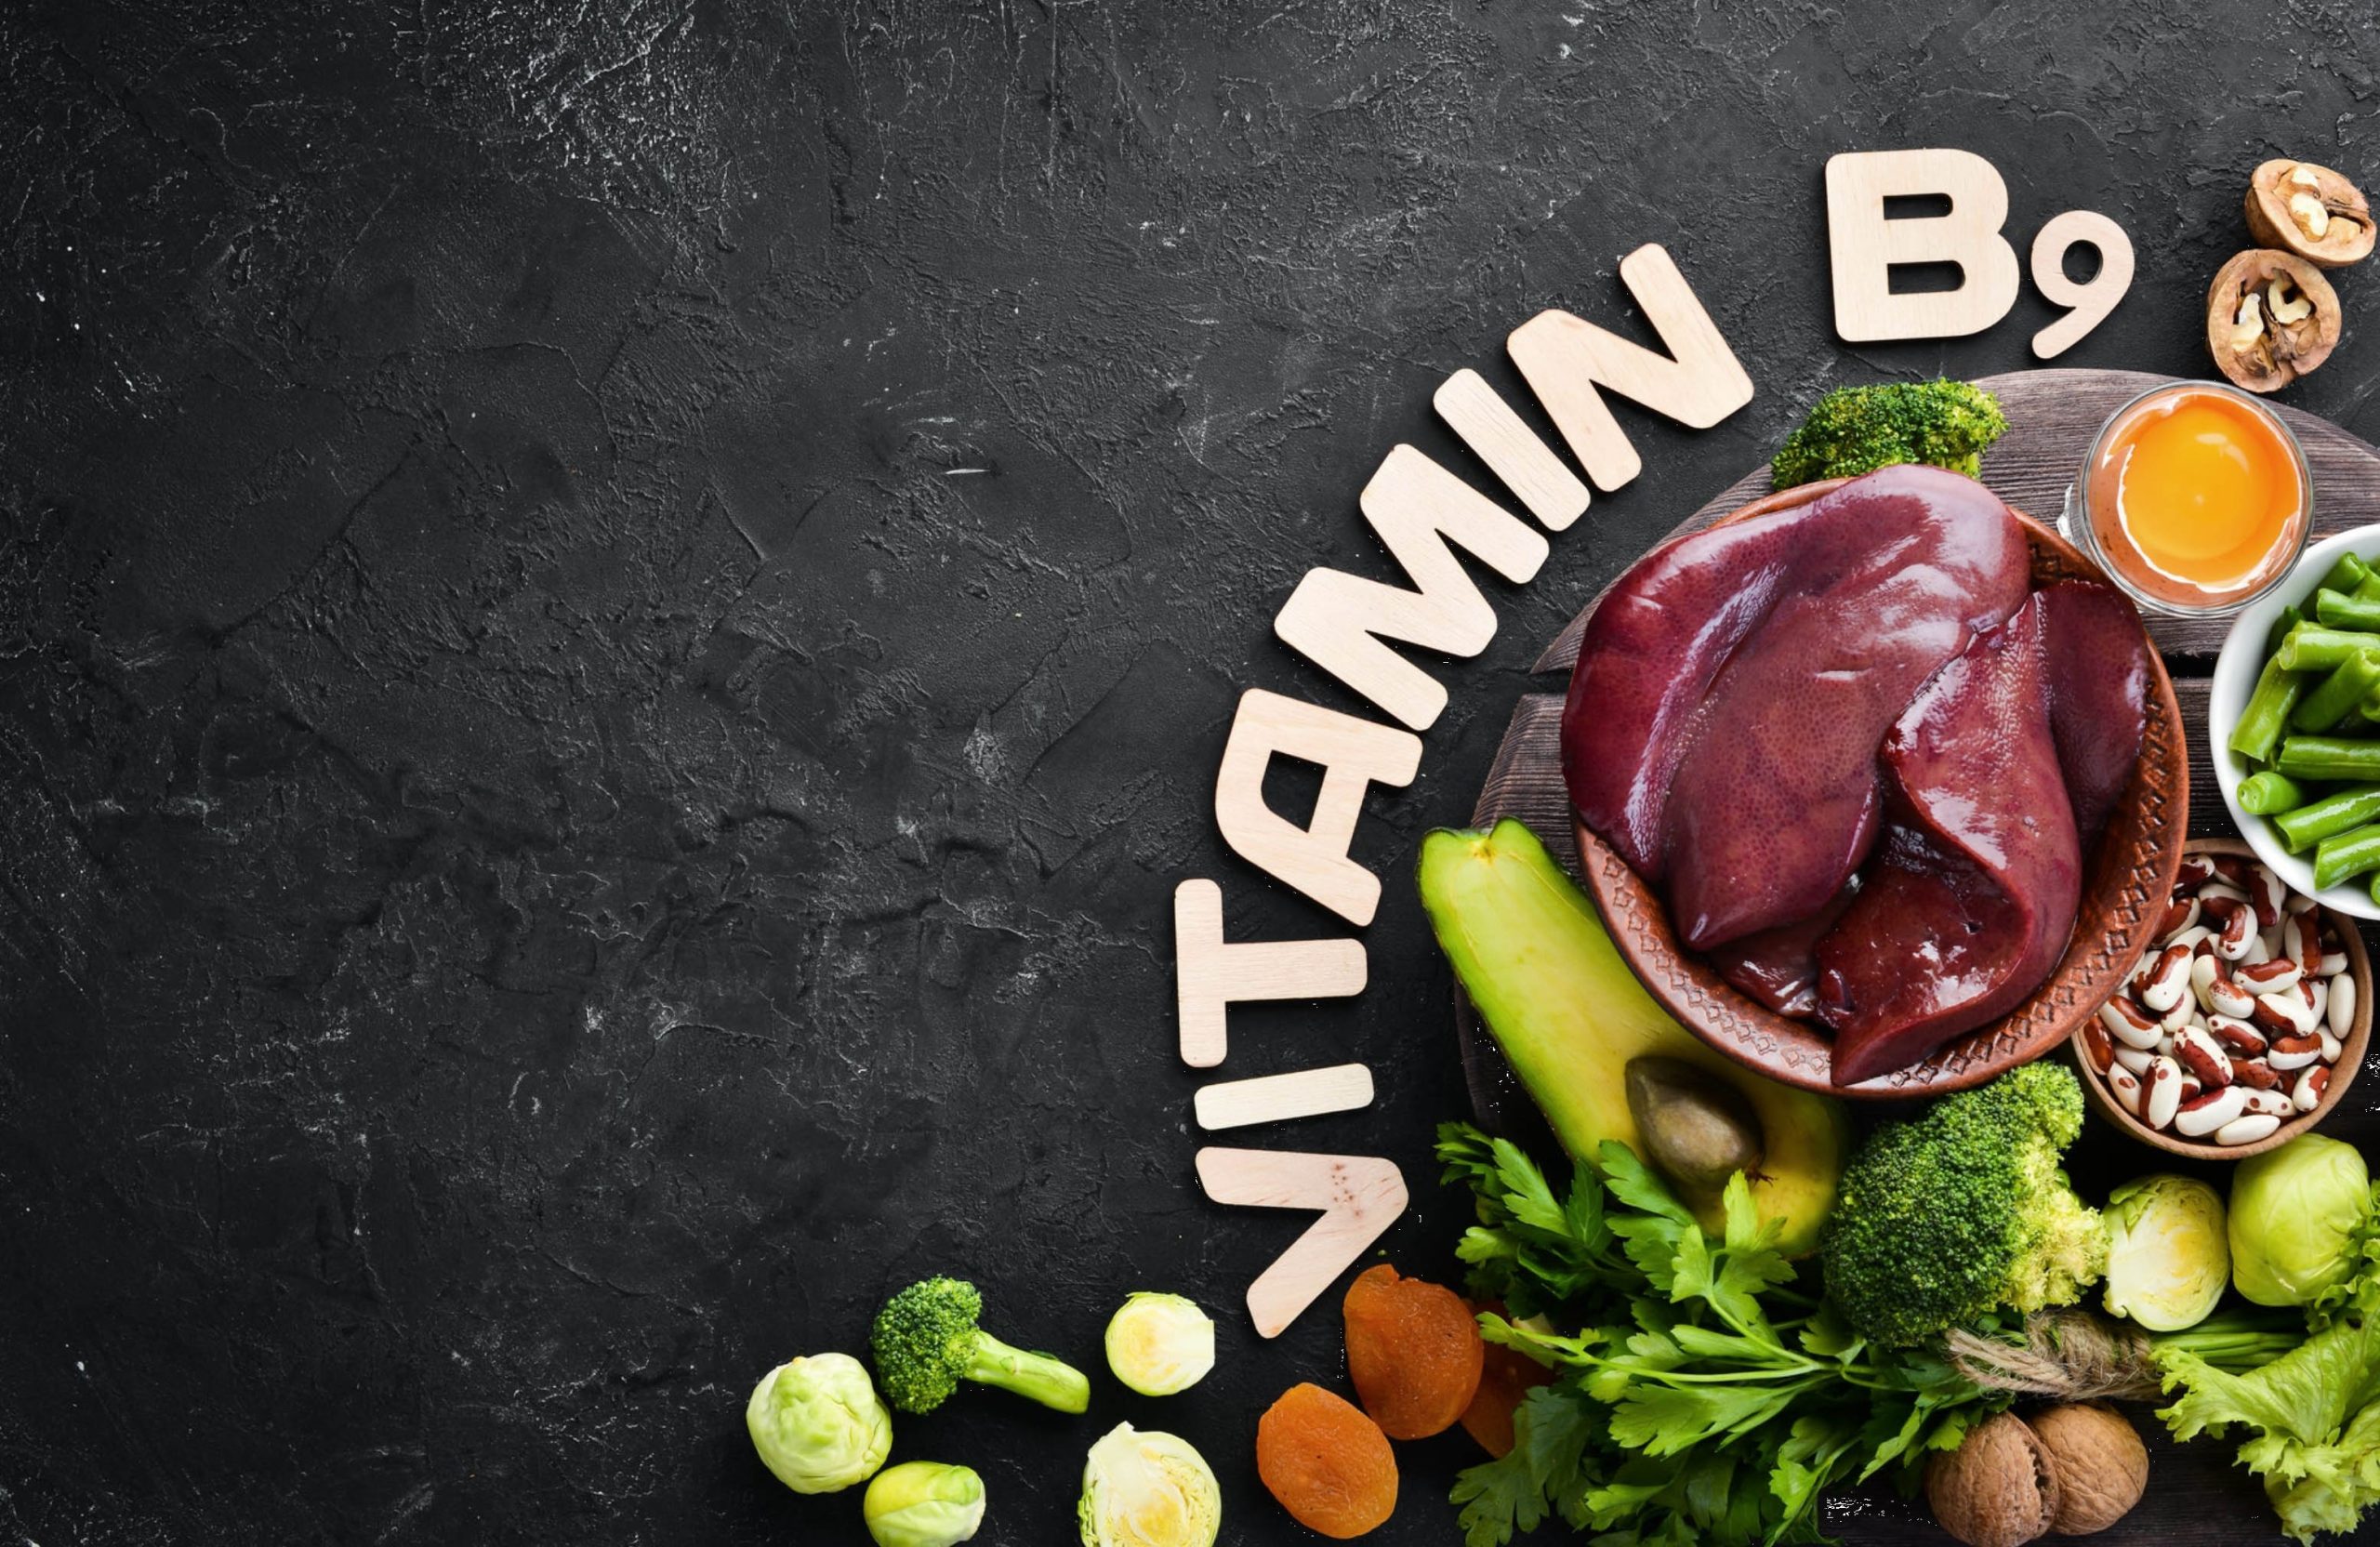 ACGrace - Vitamin b9 on a plate with vegetables and meat.